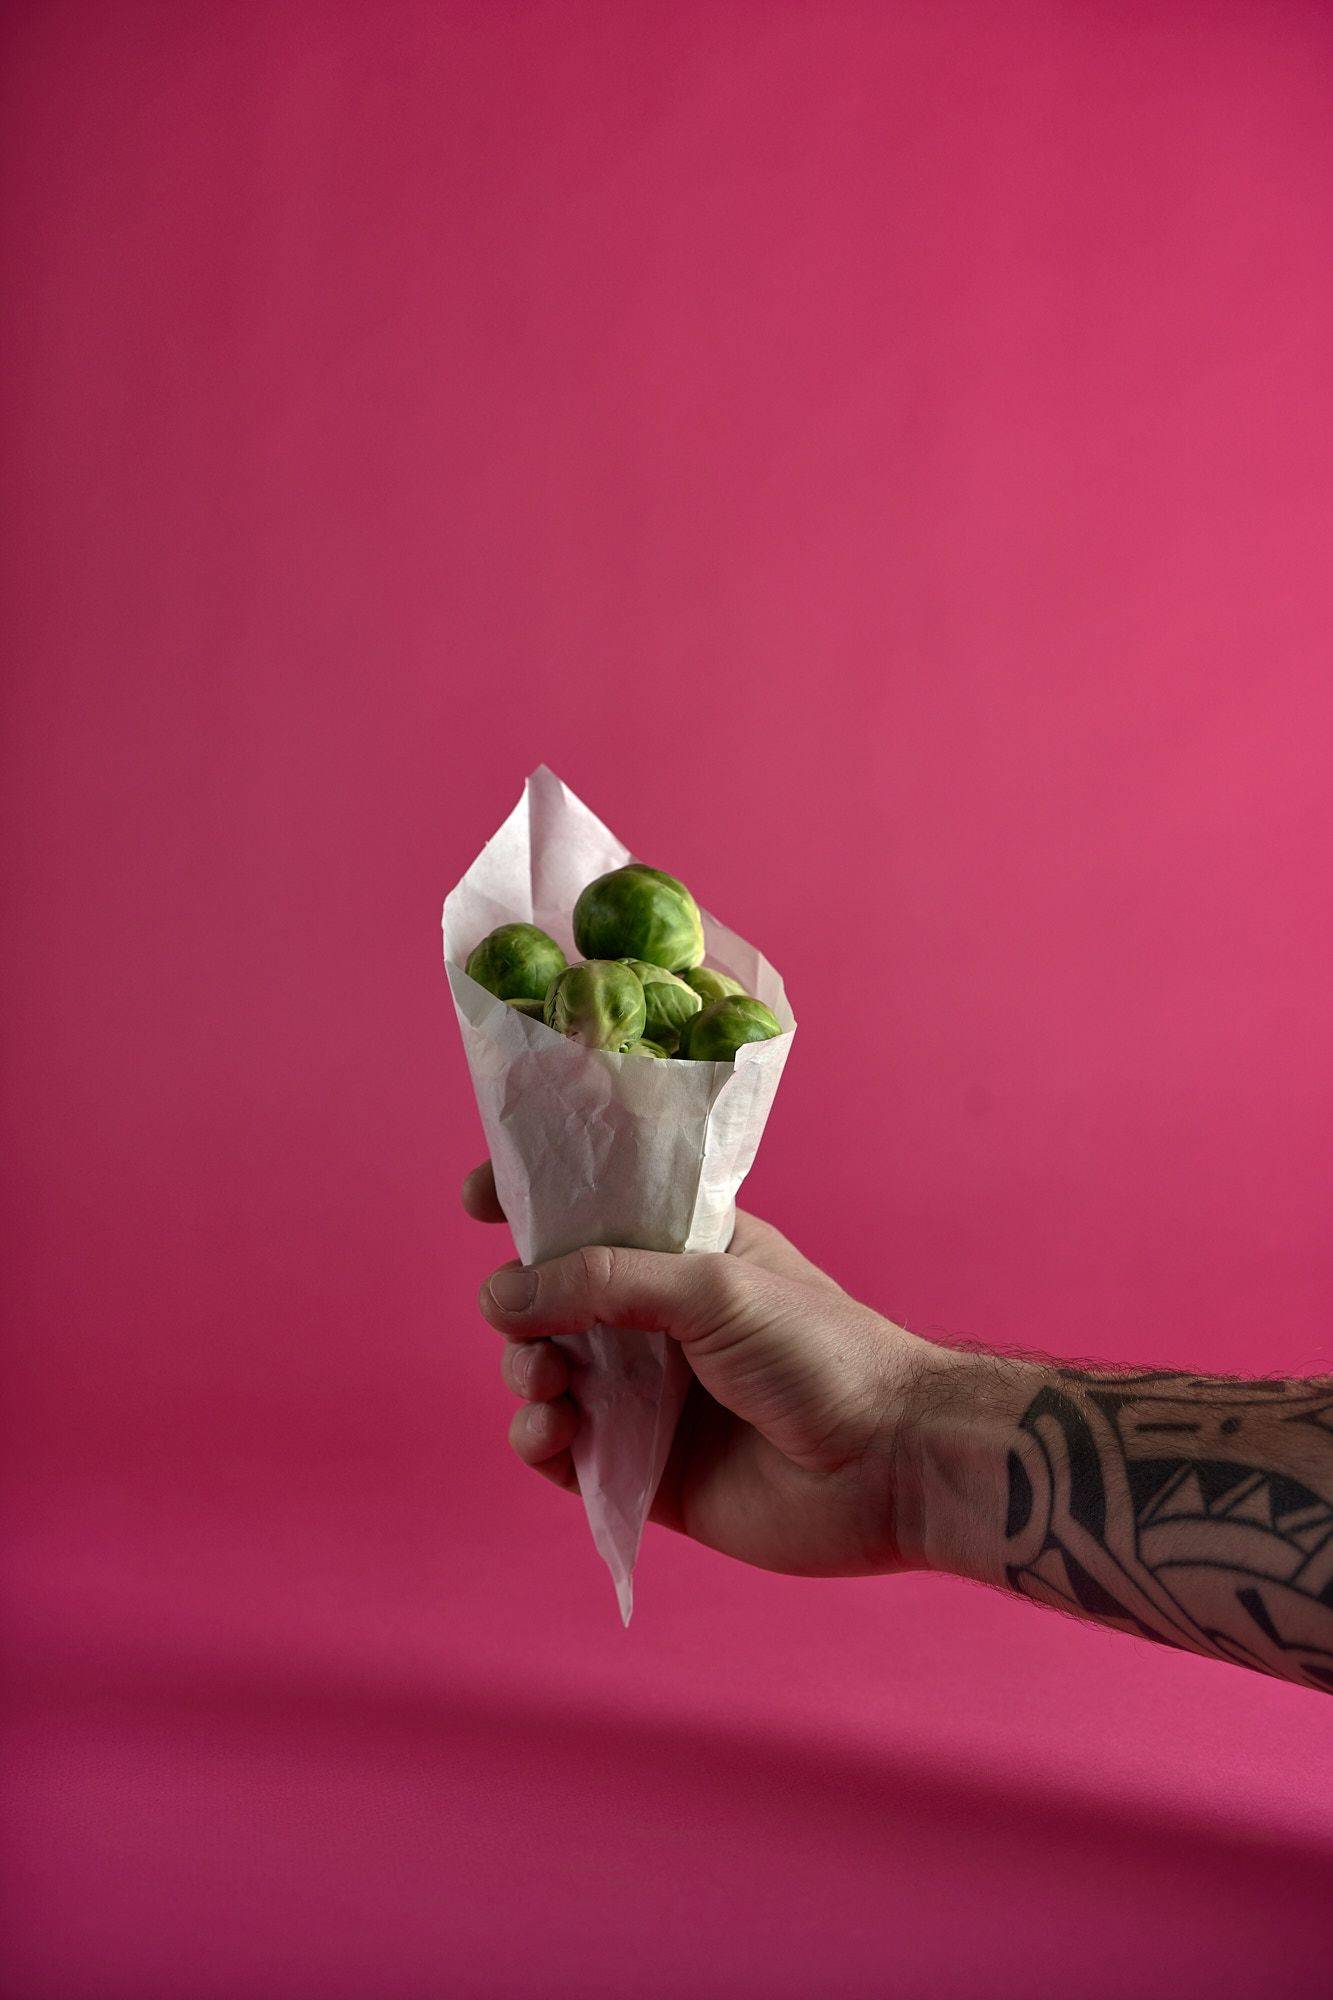 hand holding a paper bag with brussels sprouts on pink background